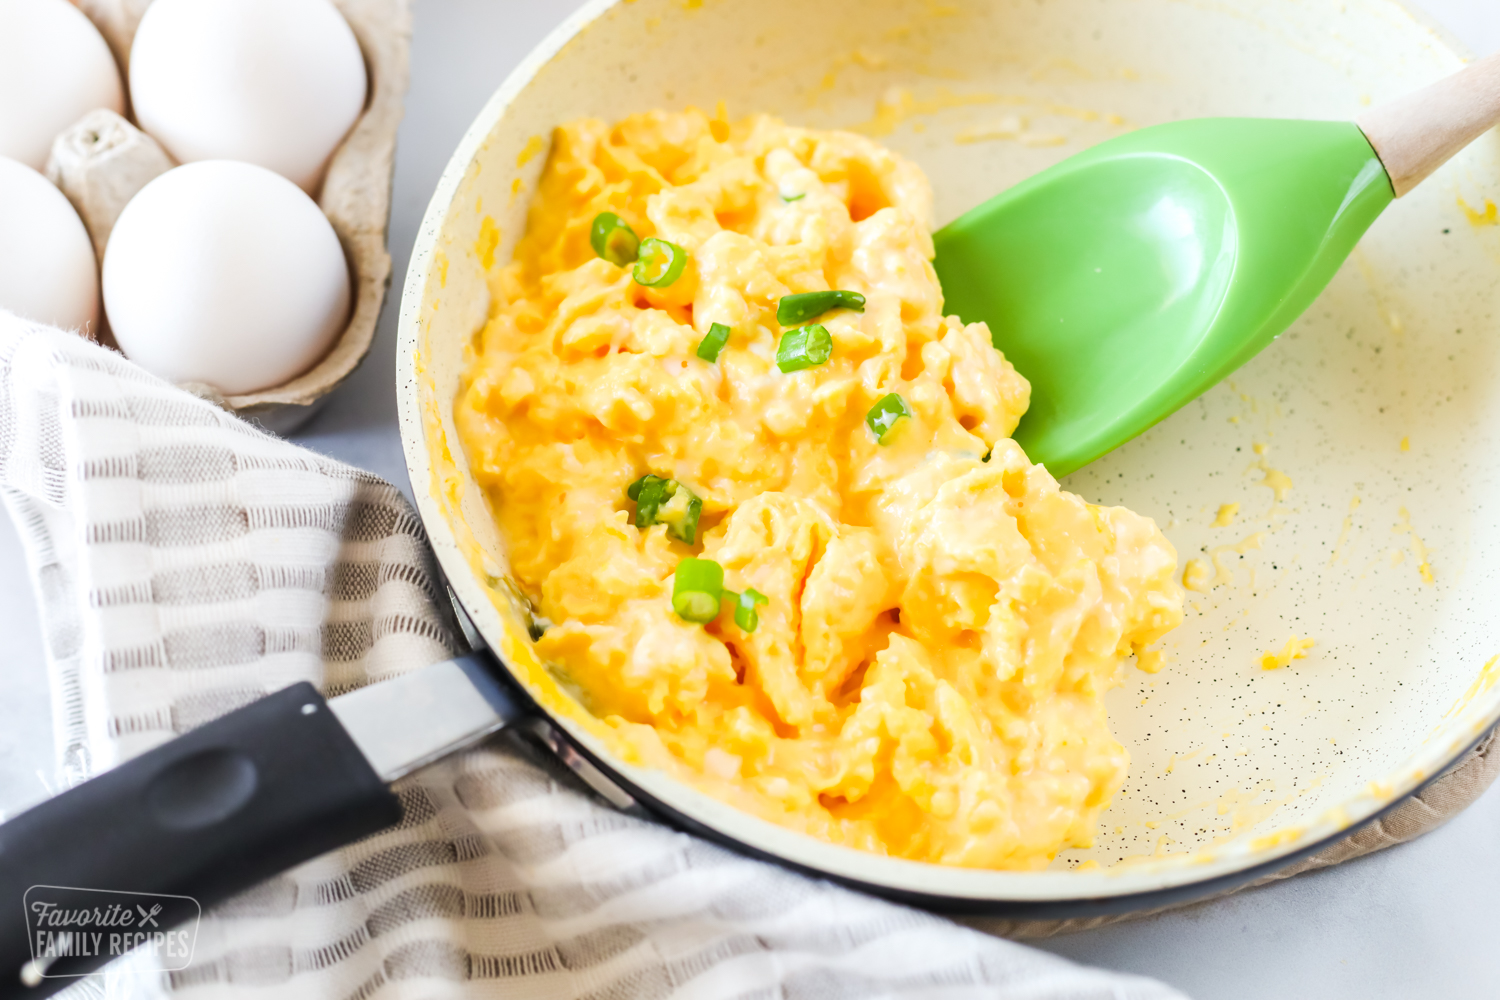 French style scrambled eggs in a pan with a green spatula. A carton of eggs is sitting next to the pan.